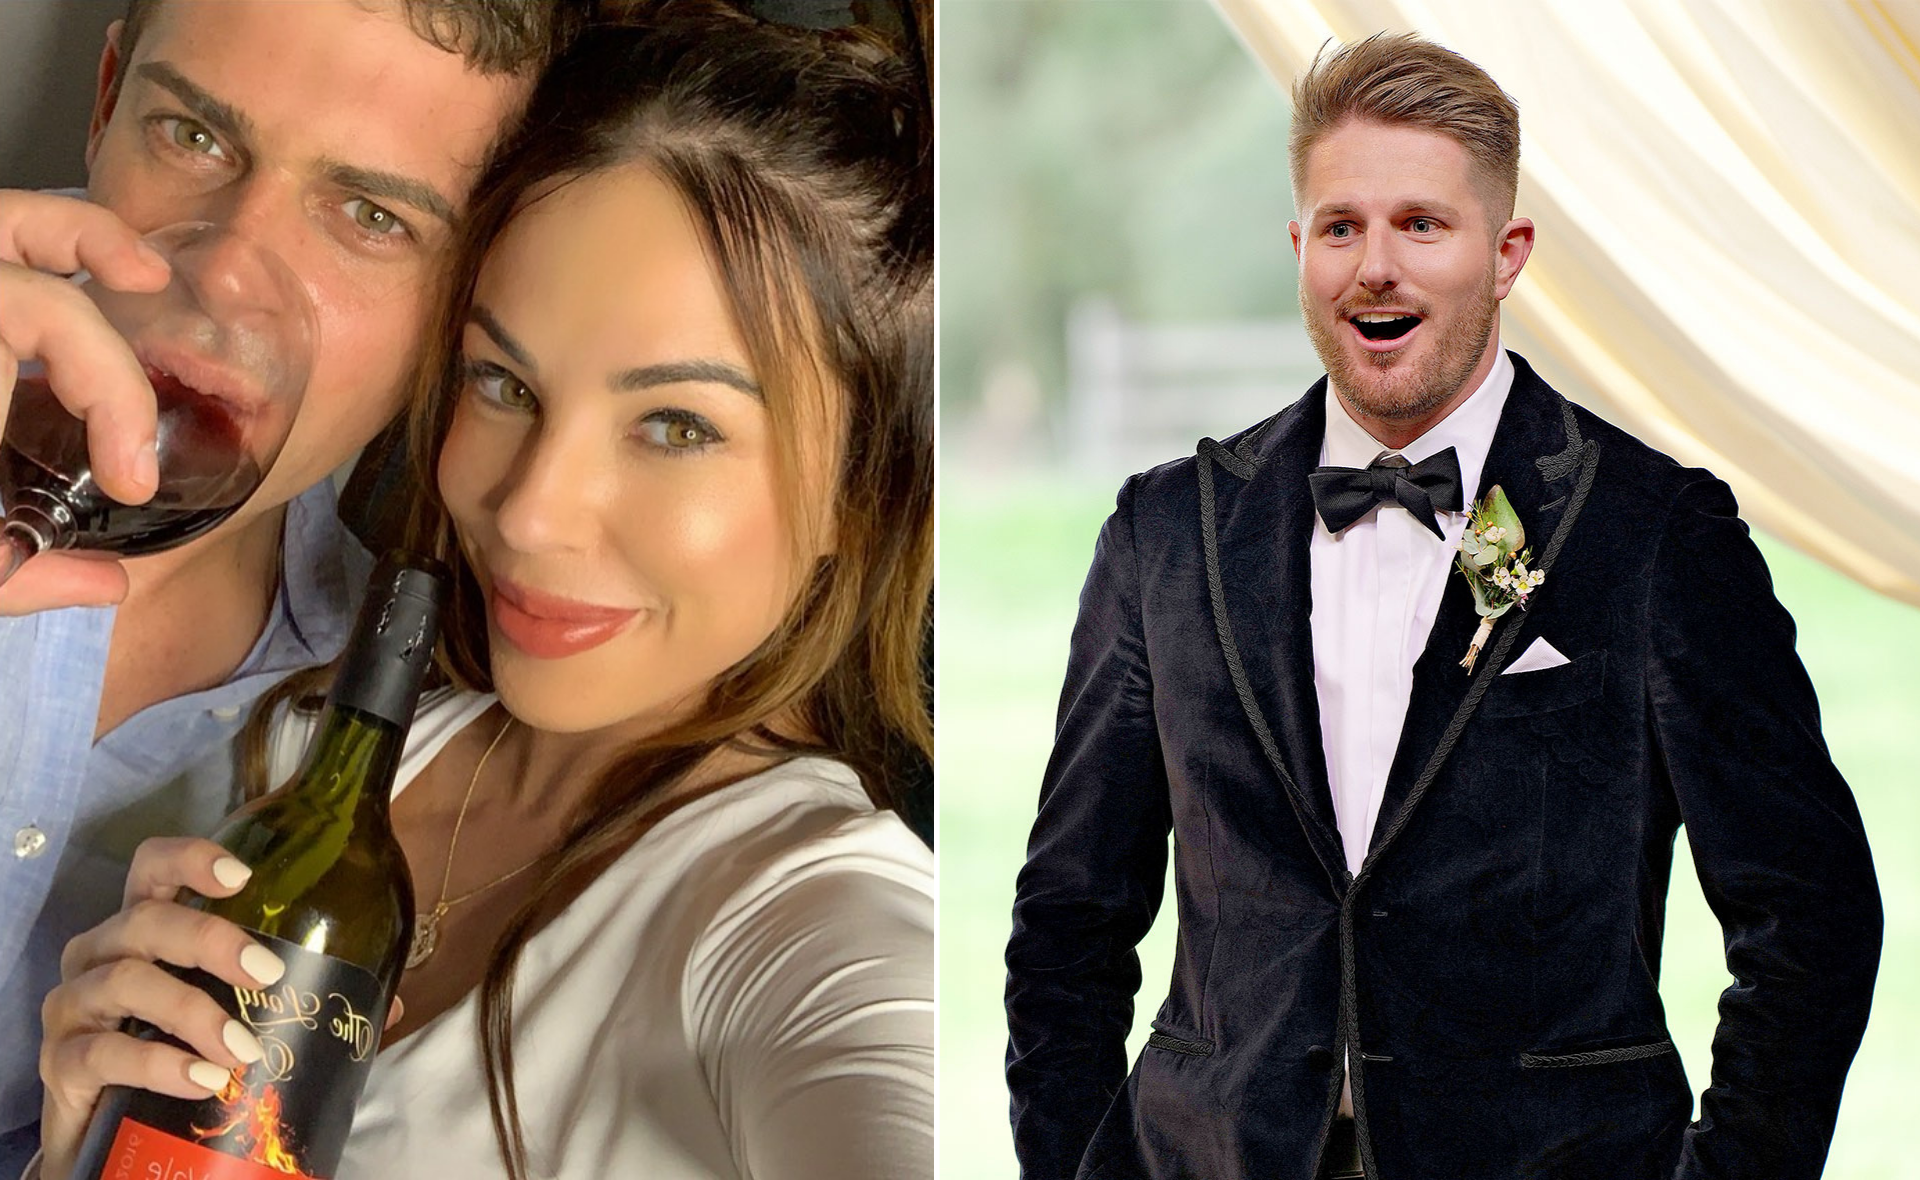 EXCLUSIVE: MAFS’ KC Osborne spills on groom Bryce Ruthven and his former fiancée after revealing their surprise connection